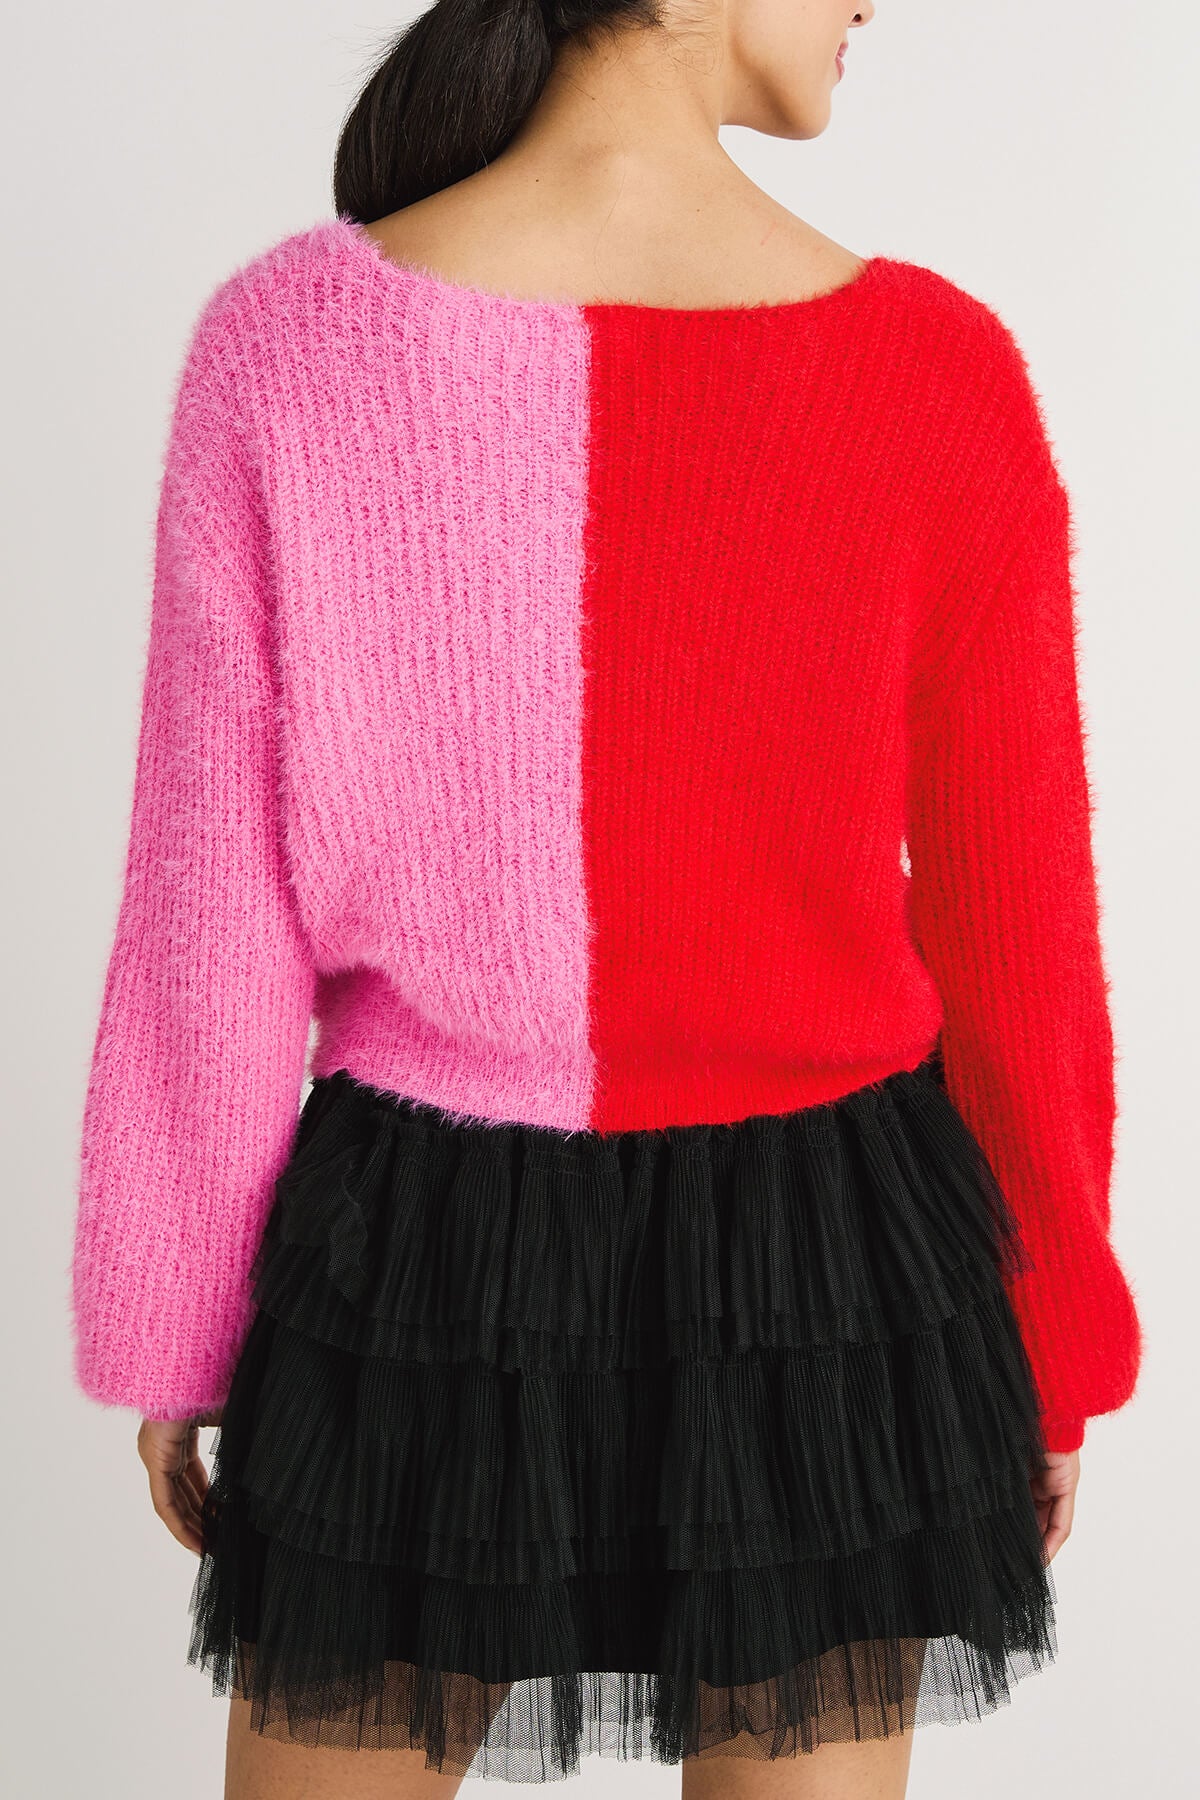 Fate Colorblock Twist Front Sweater